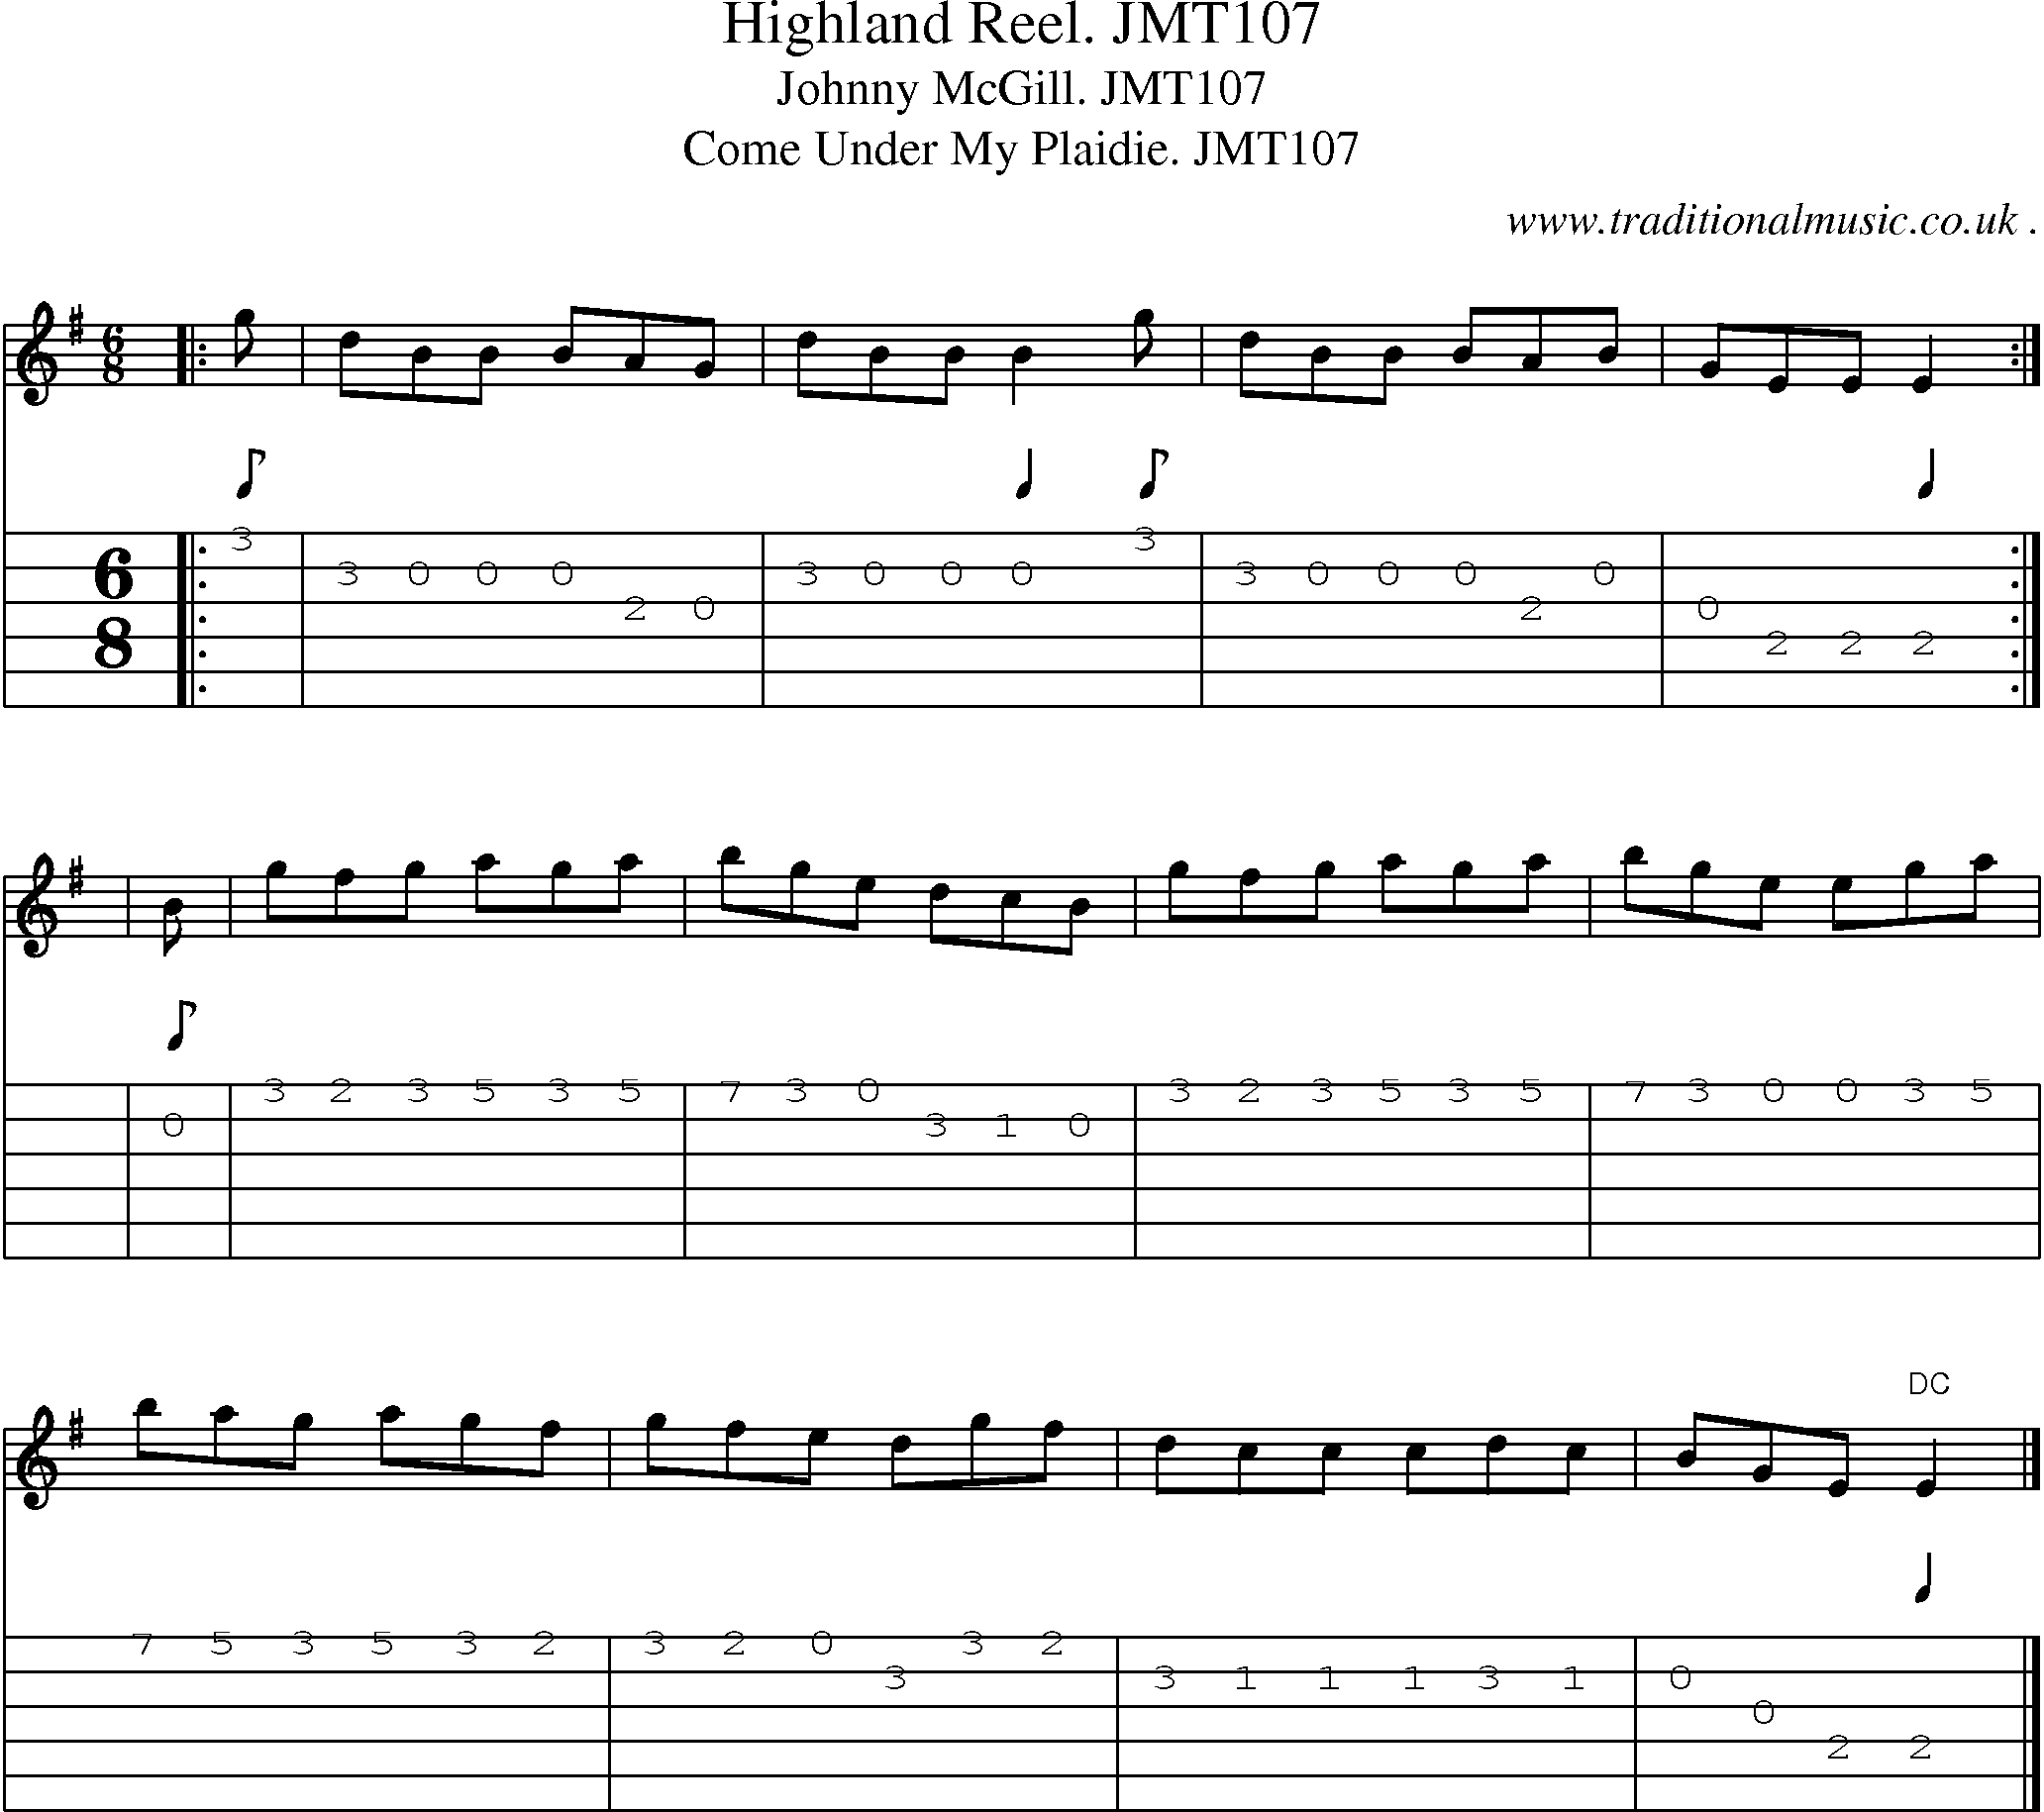 Sheet-music  score, Chords and Guitar Tabs for Highland Reel Jmt107